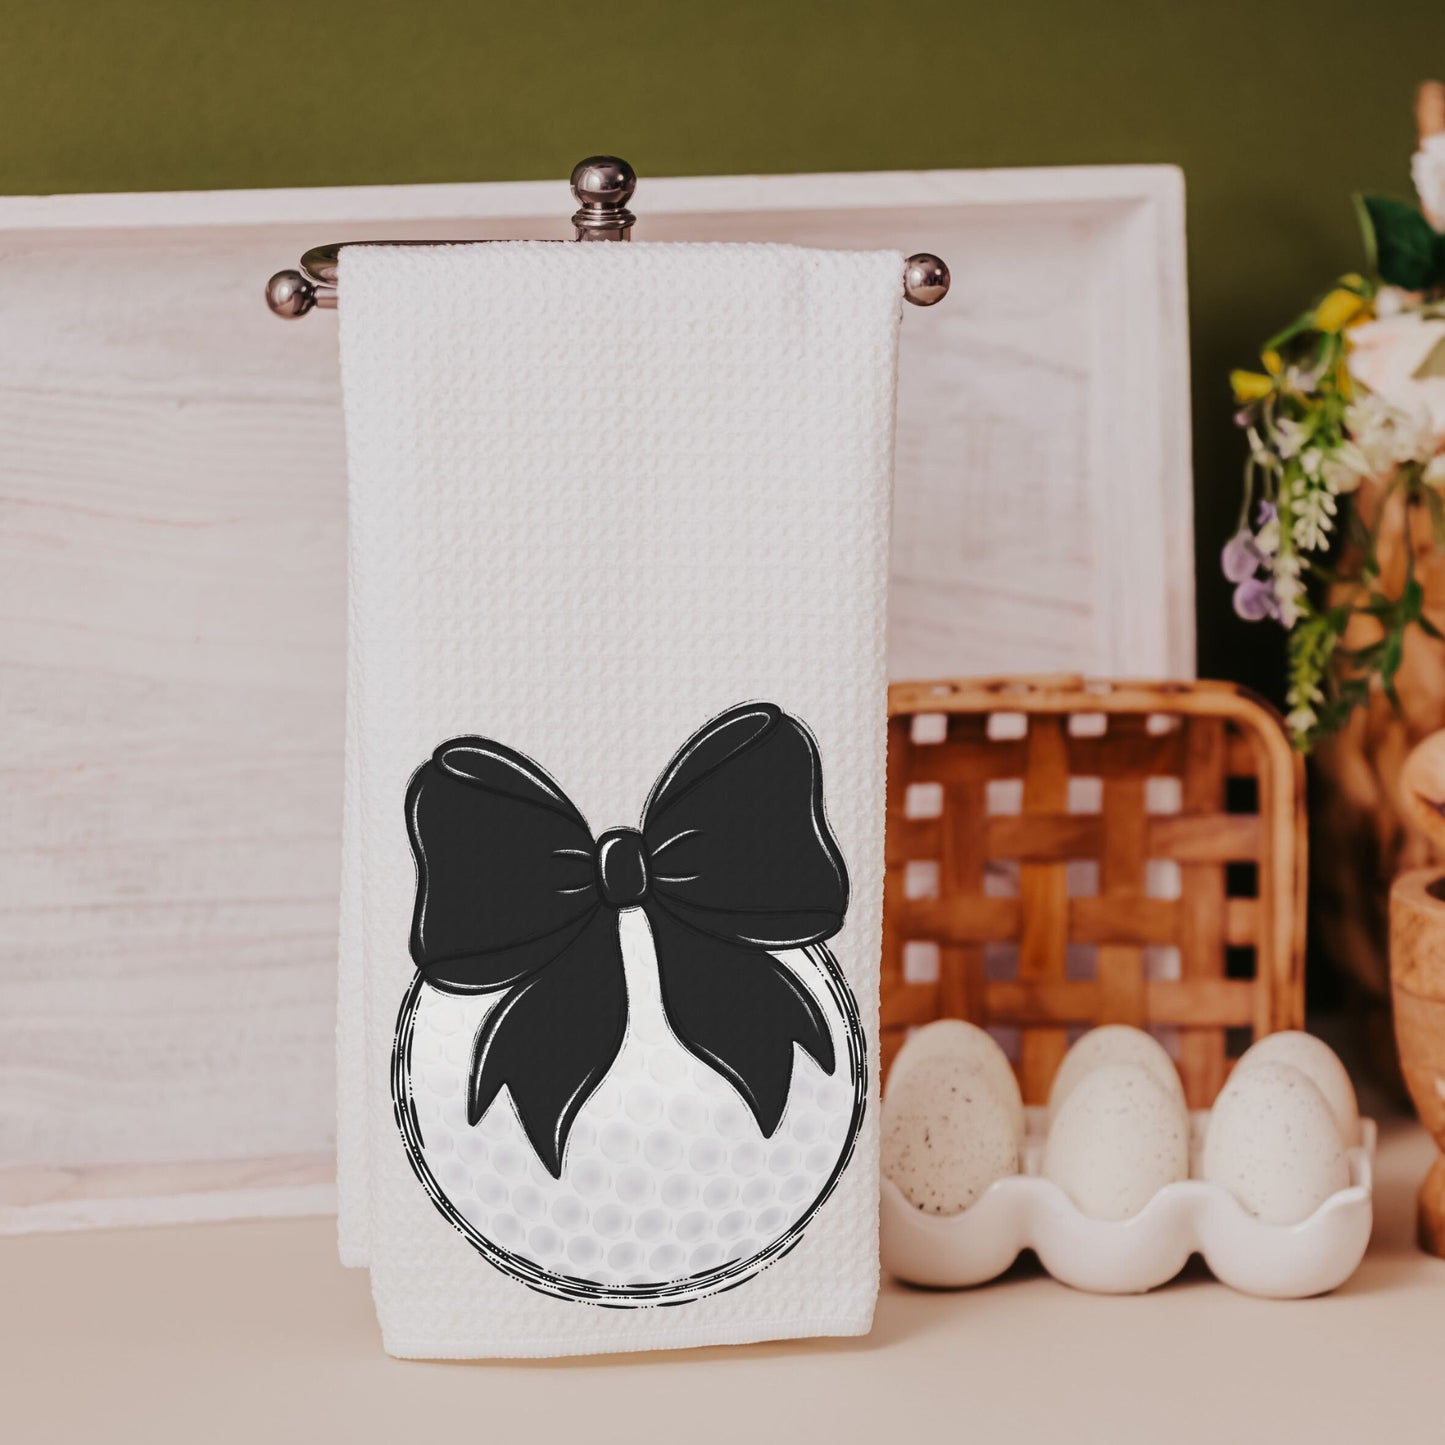 Cute Golf Towels with a Black Bow